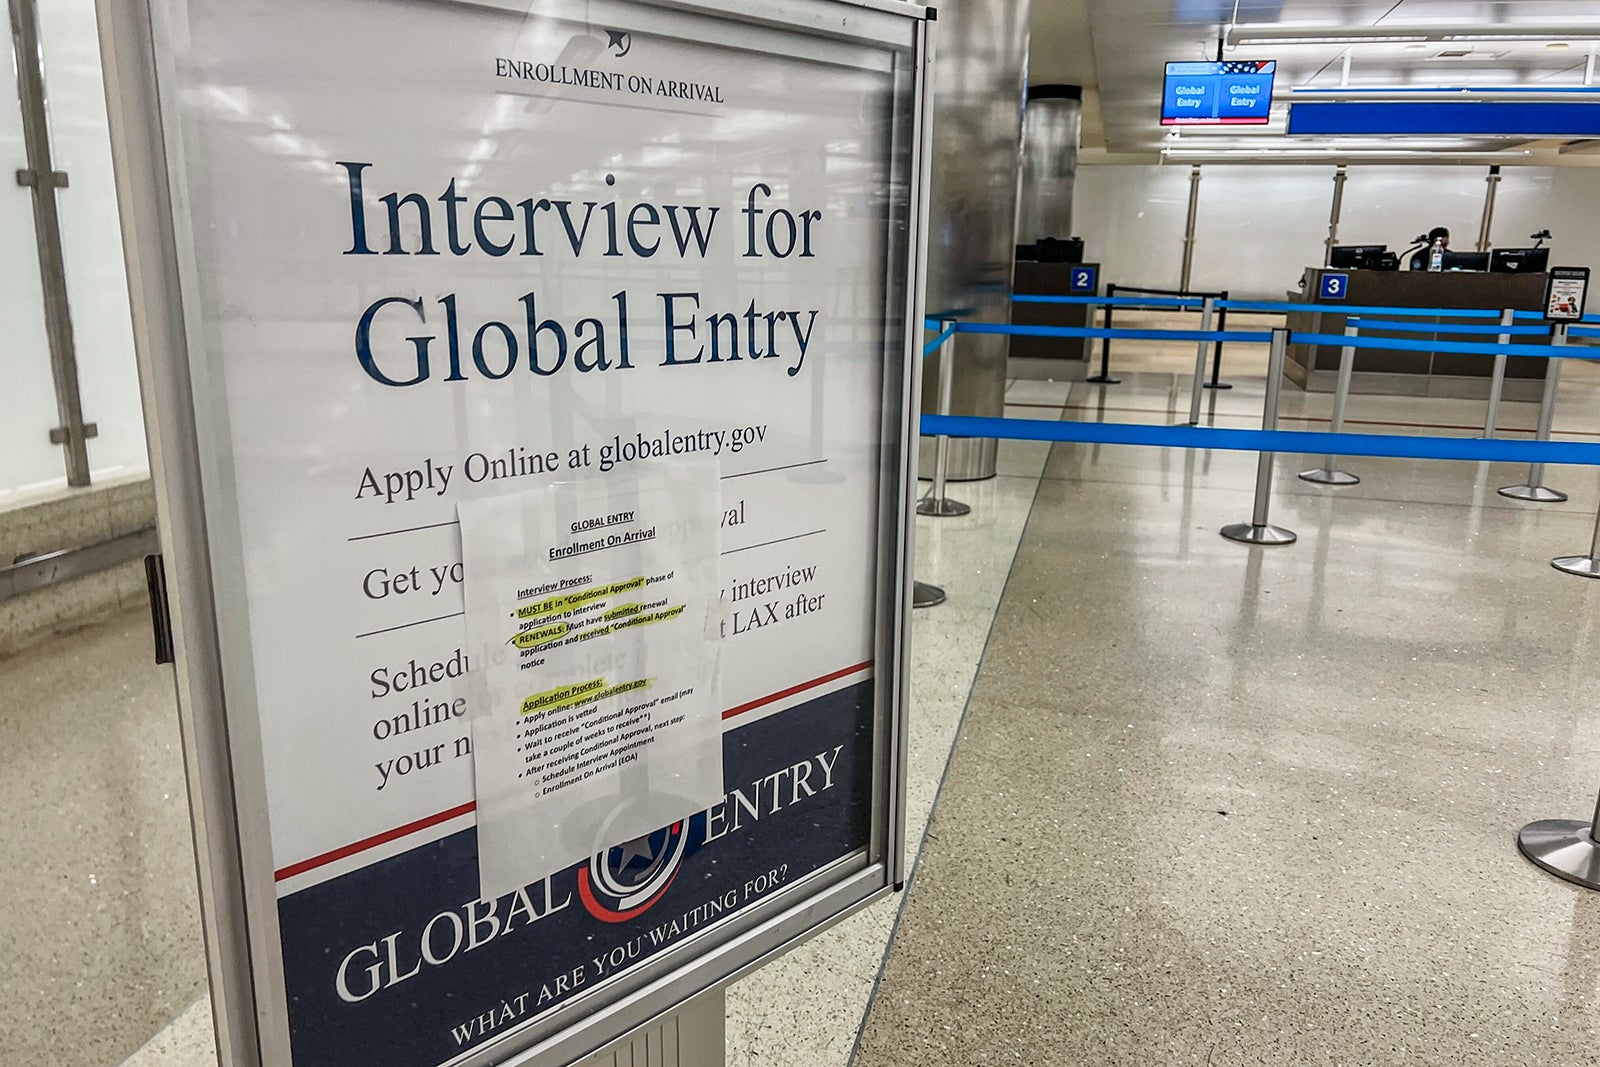 Dulles turns into first airport to supply World Entry interviews upon departure